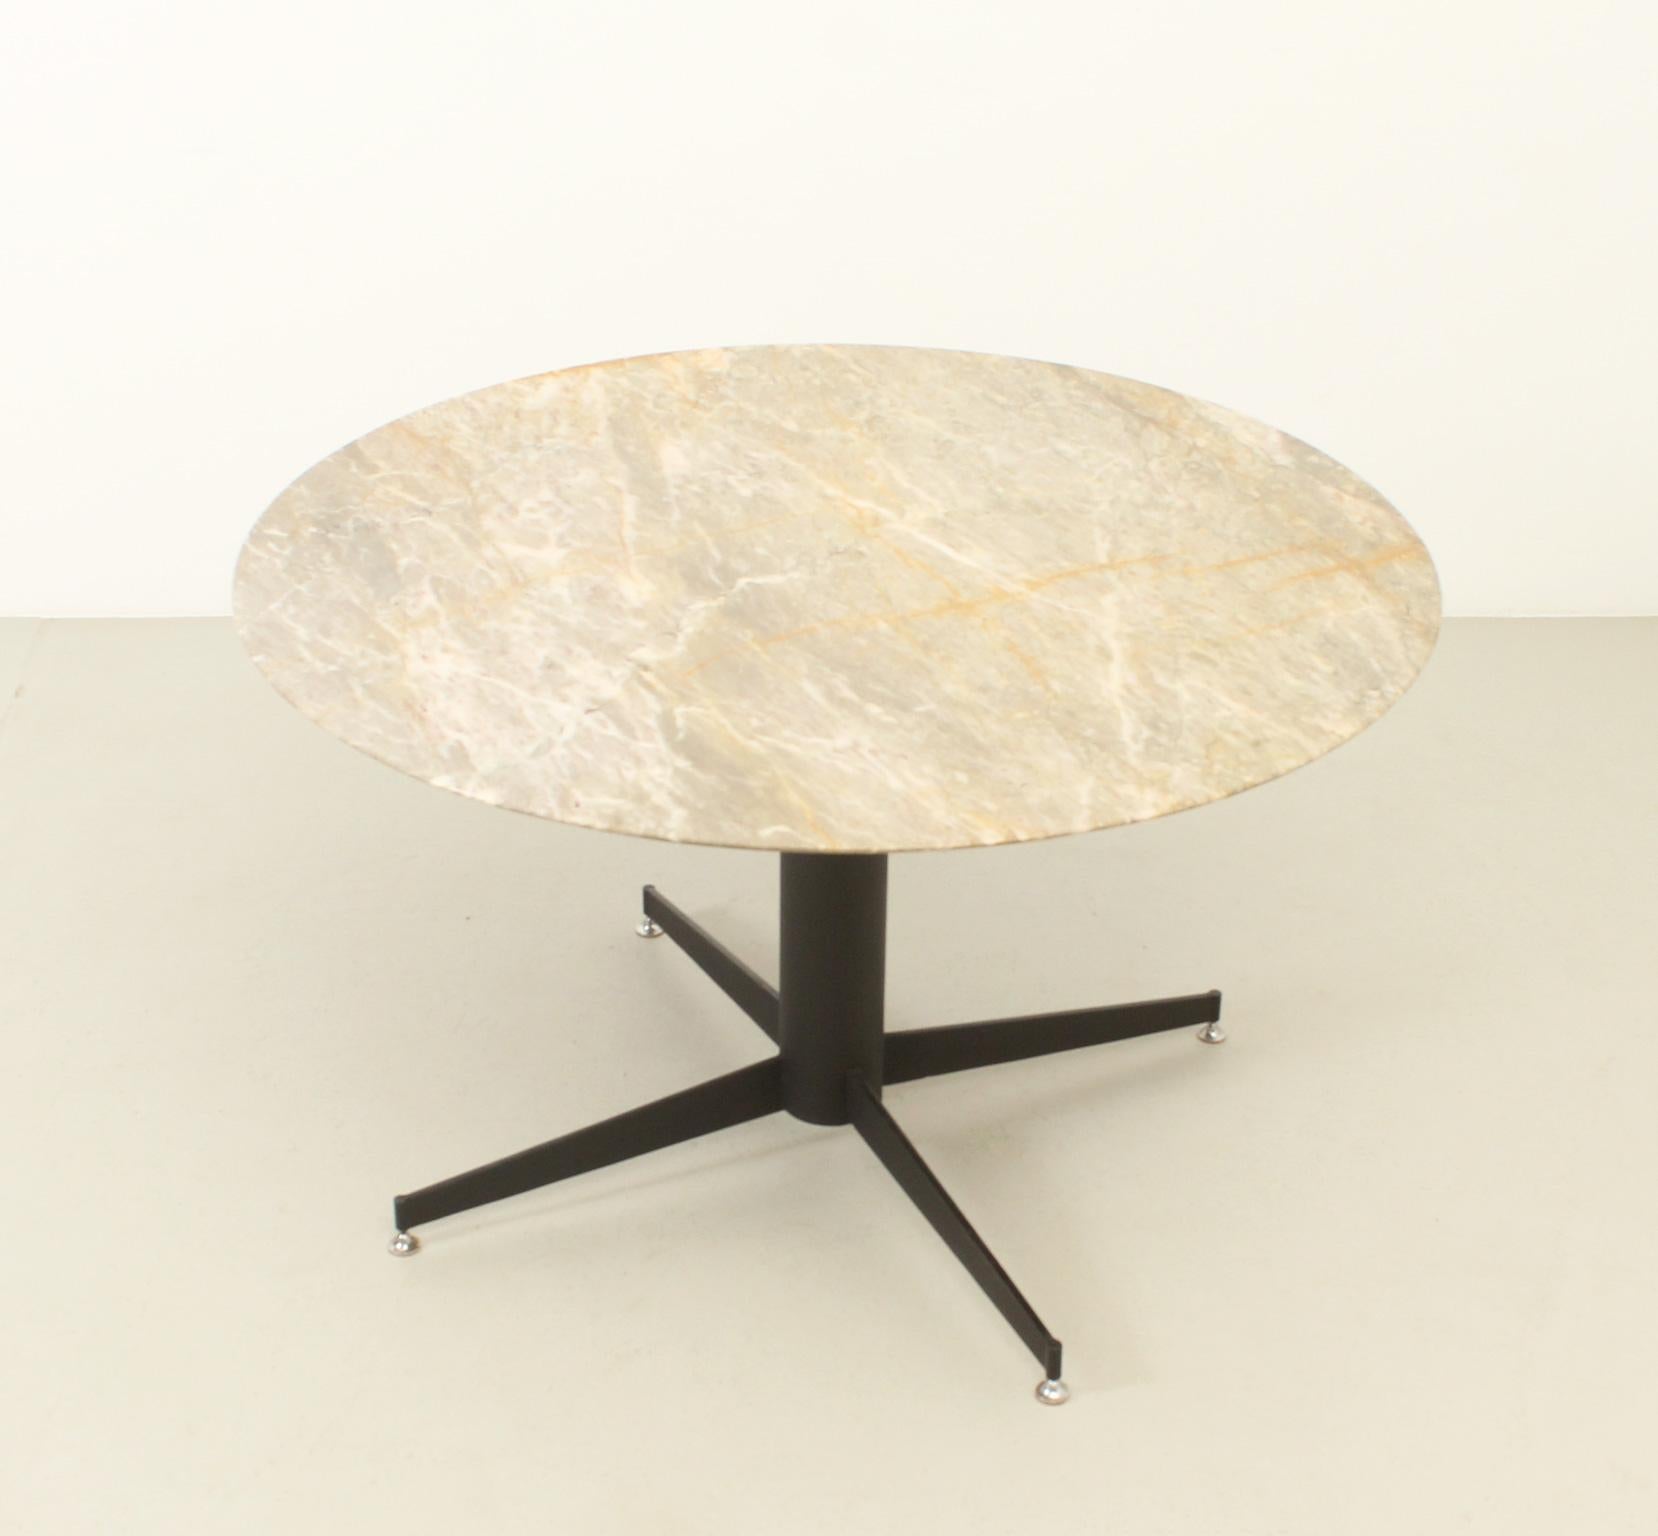 Marble dining table from 1950s, Spain. Grey marble with yellow rust veins top and black lacquered metal base with adjustable feet.